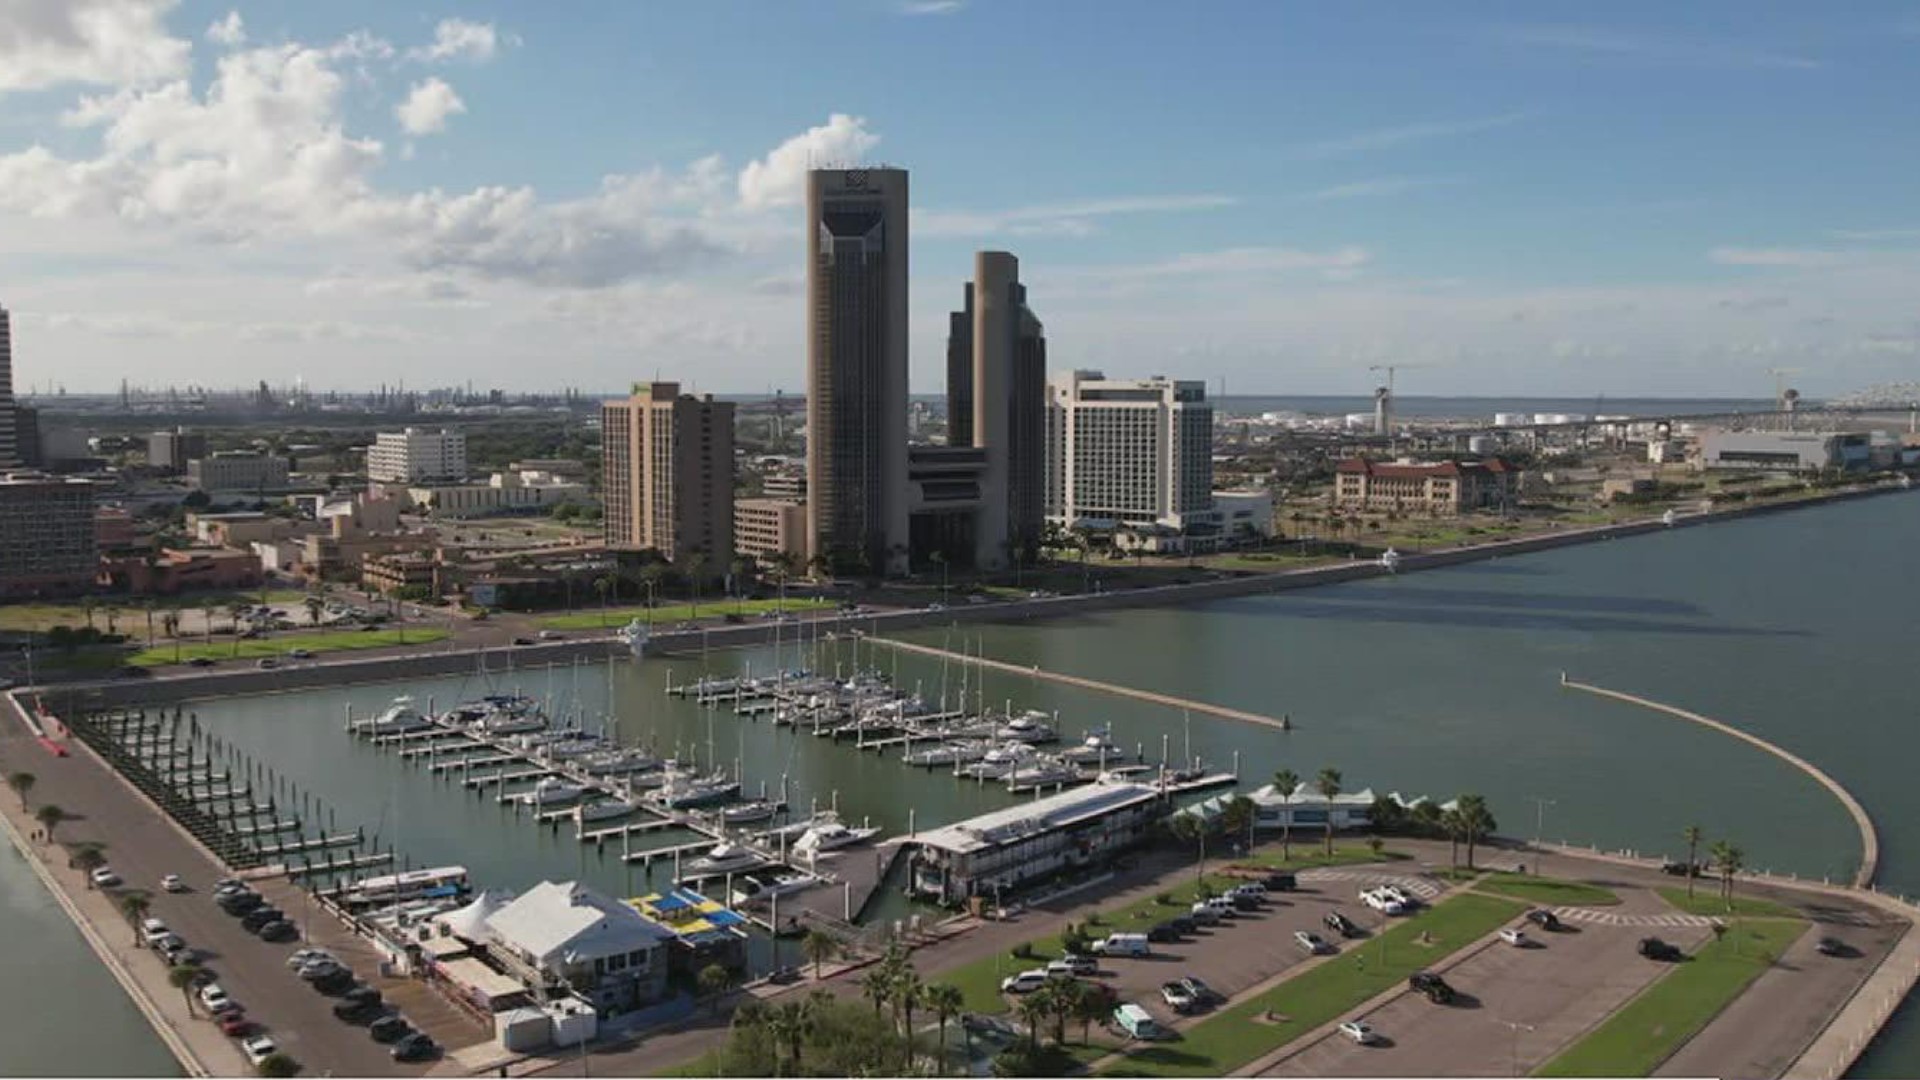 Corpus Christi rental experts told 3NEWS that he is noticing renewals are increasing in the area.